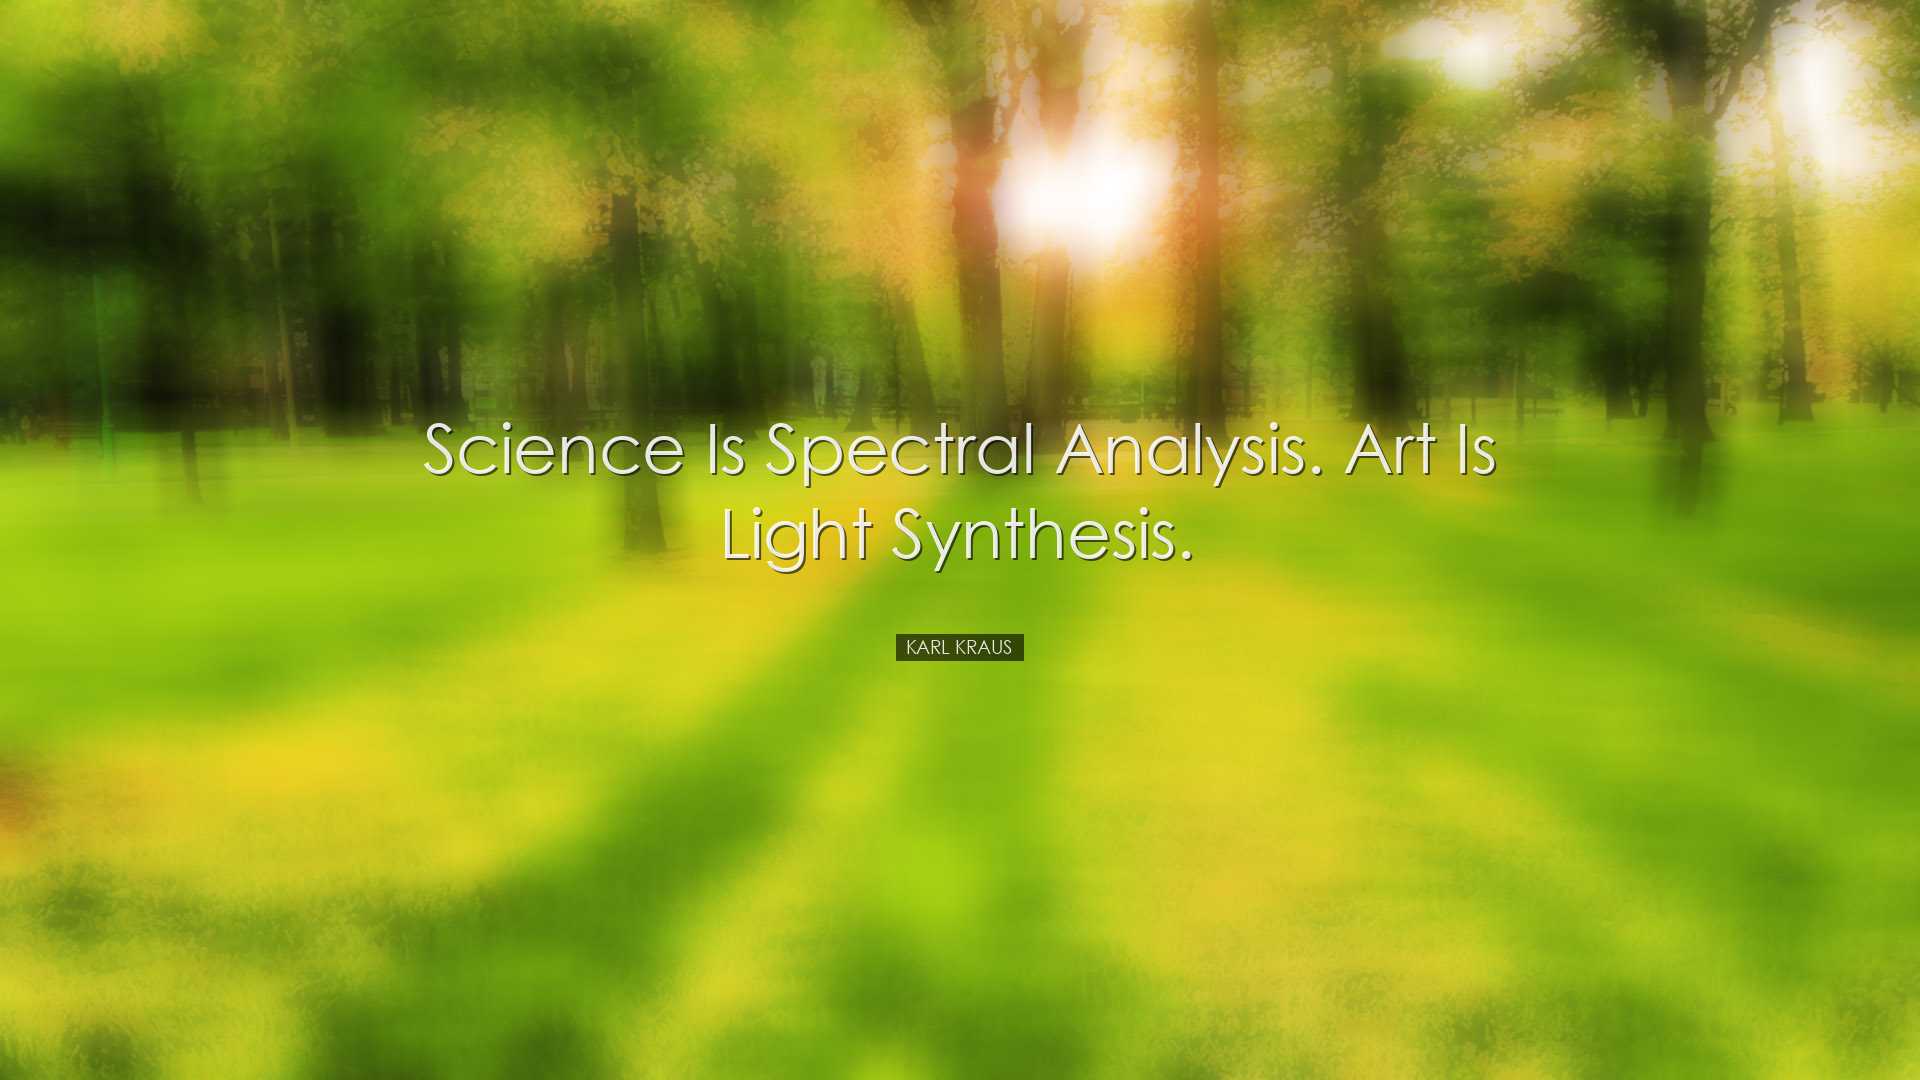 Science is spectral analysis. Art is light synthesis. - Karl Kraus